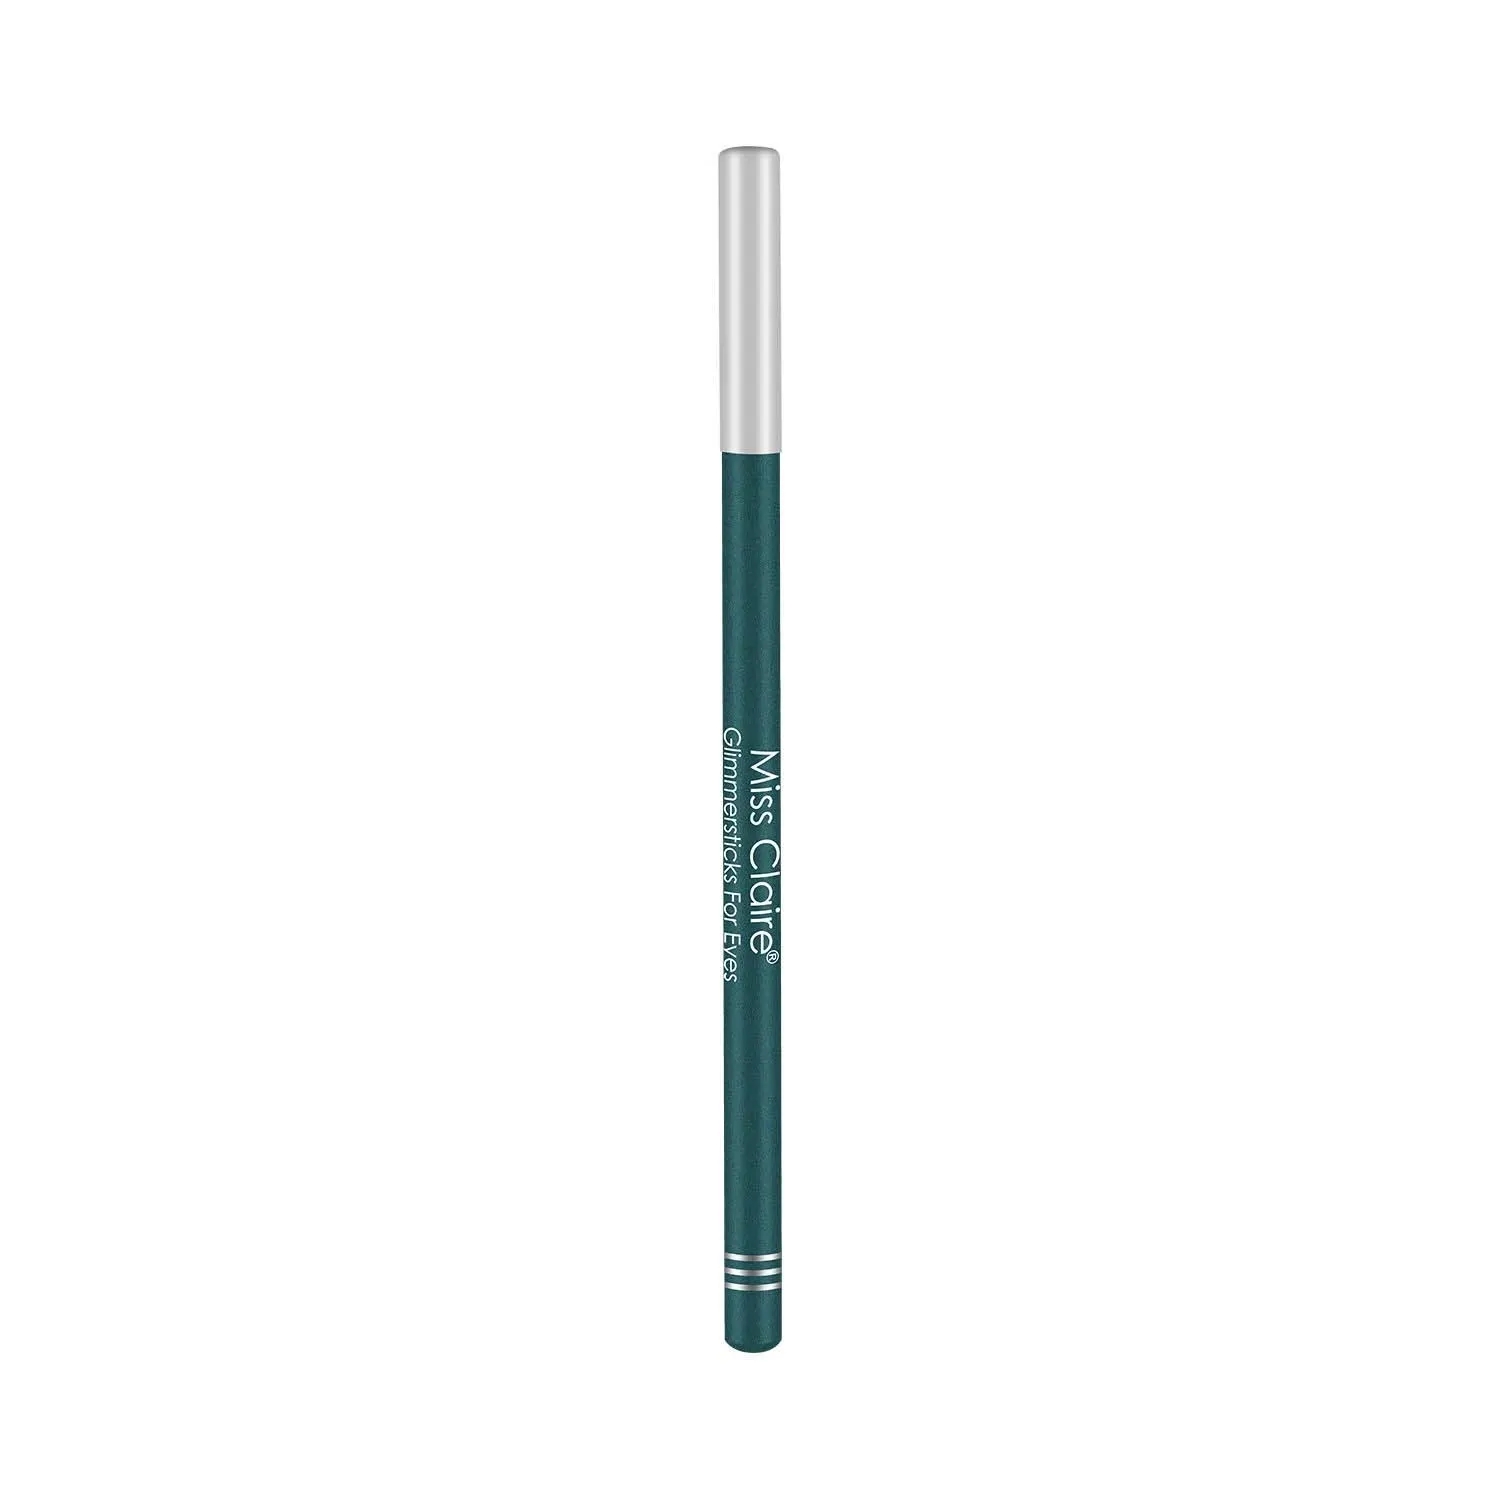 Miss Claire Glimmersticks For Eyes - E-17 Mint (1.4g)